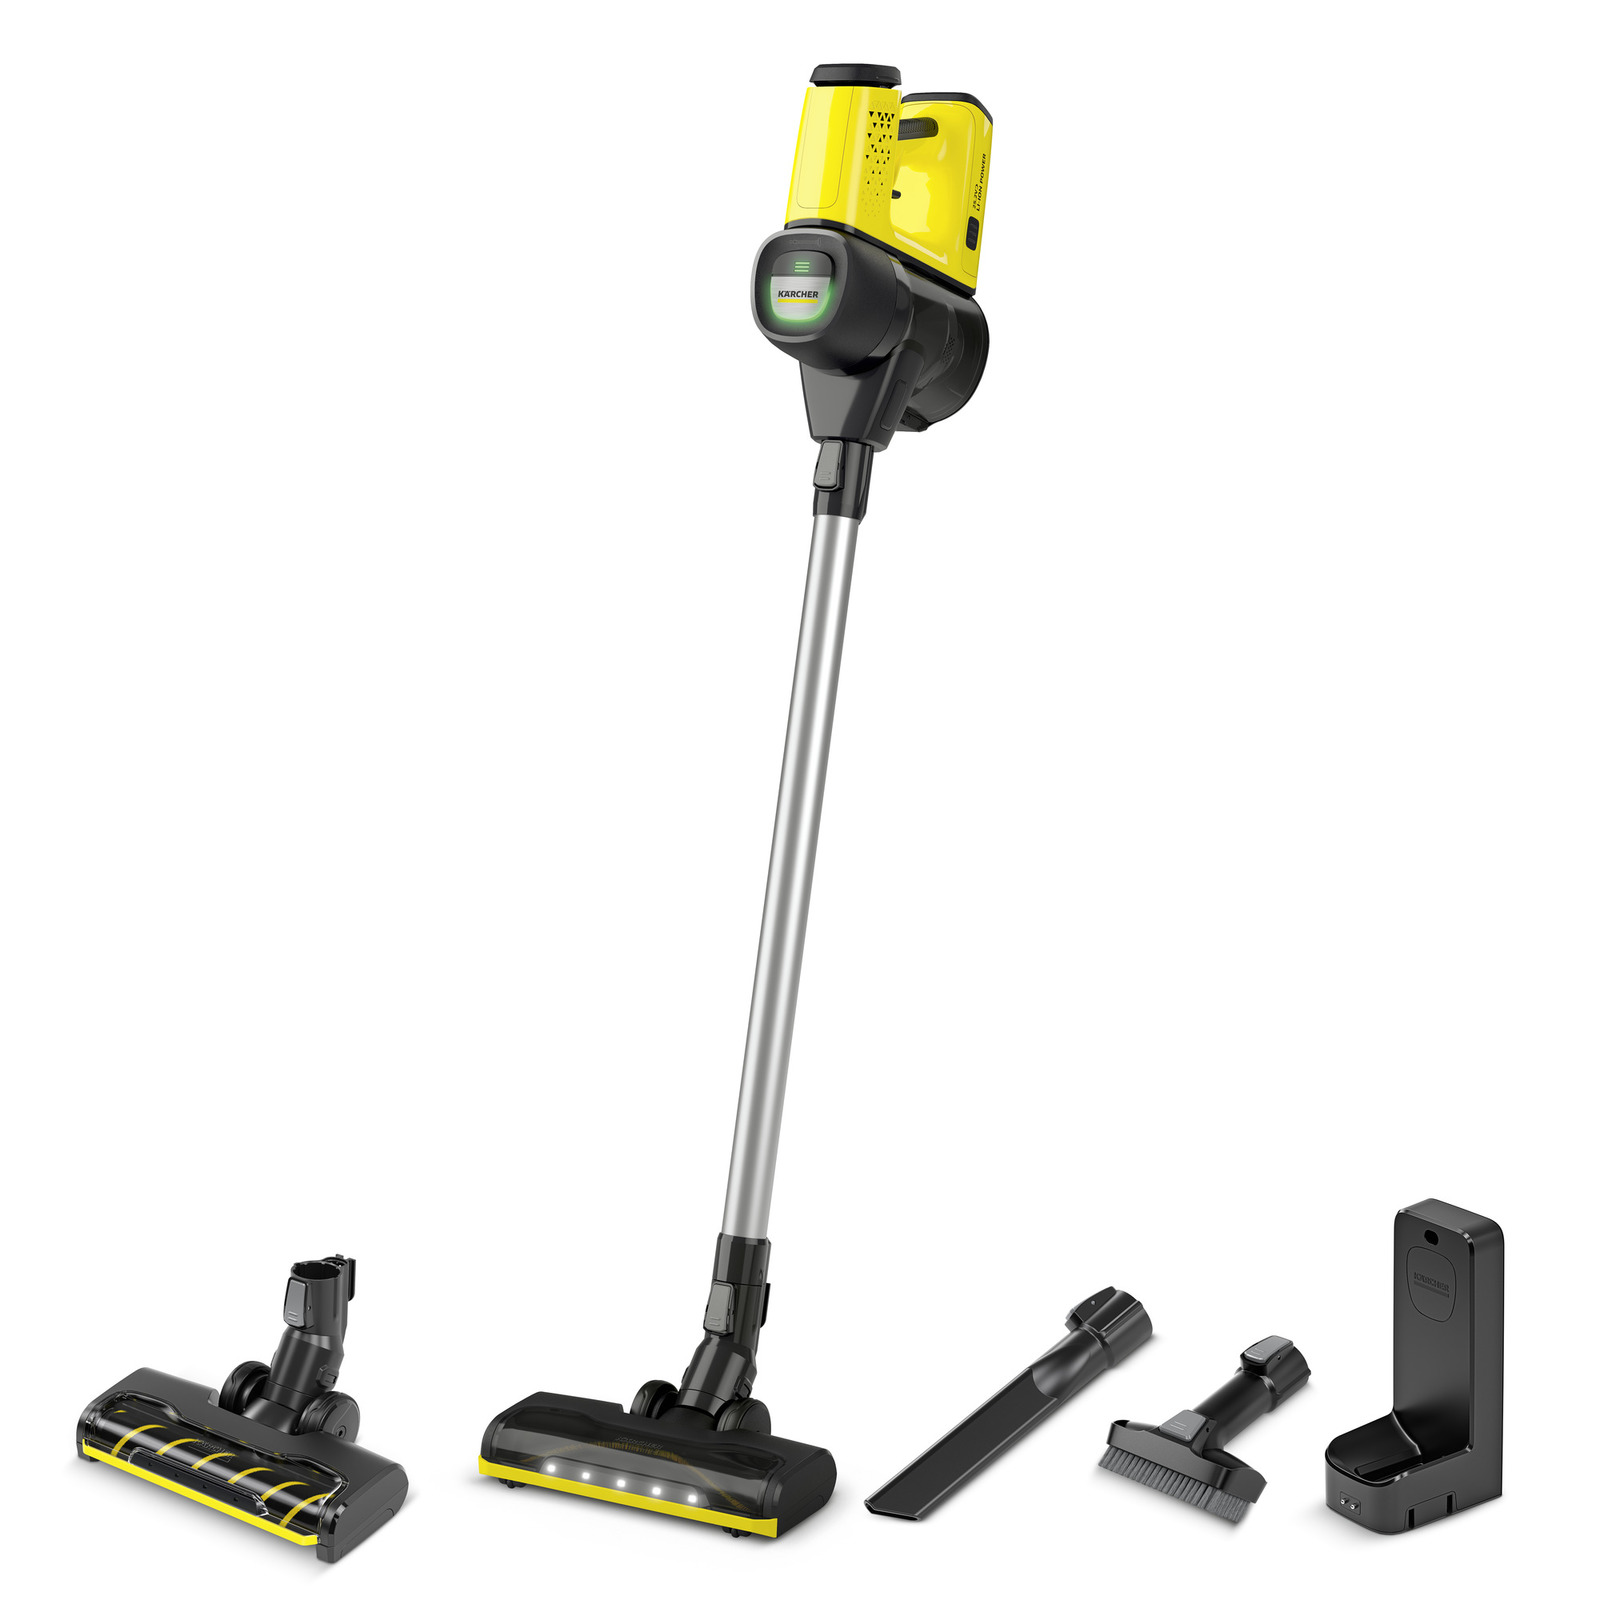 Kärcher – Akku-Staubsauger VC 6 Cordless ourFamily Limited Edition